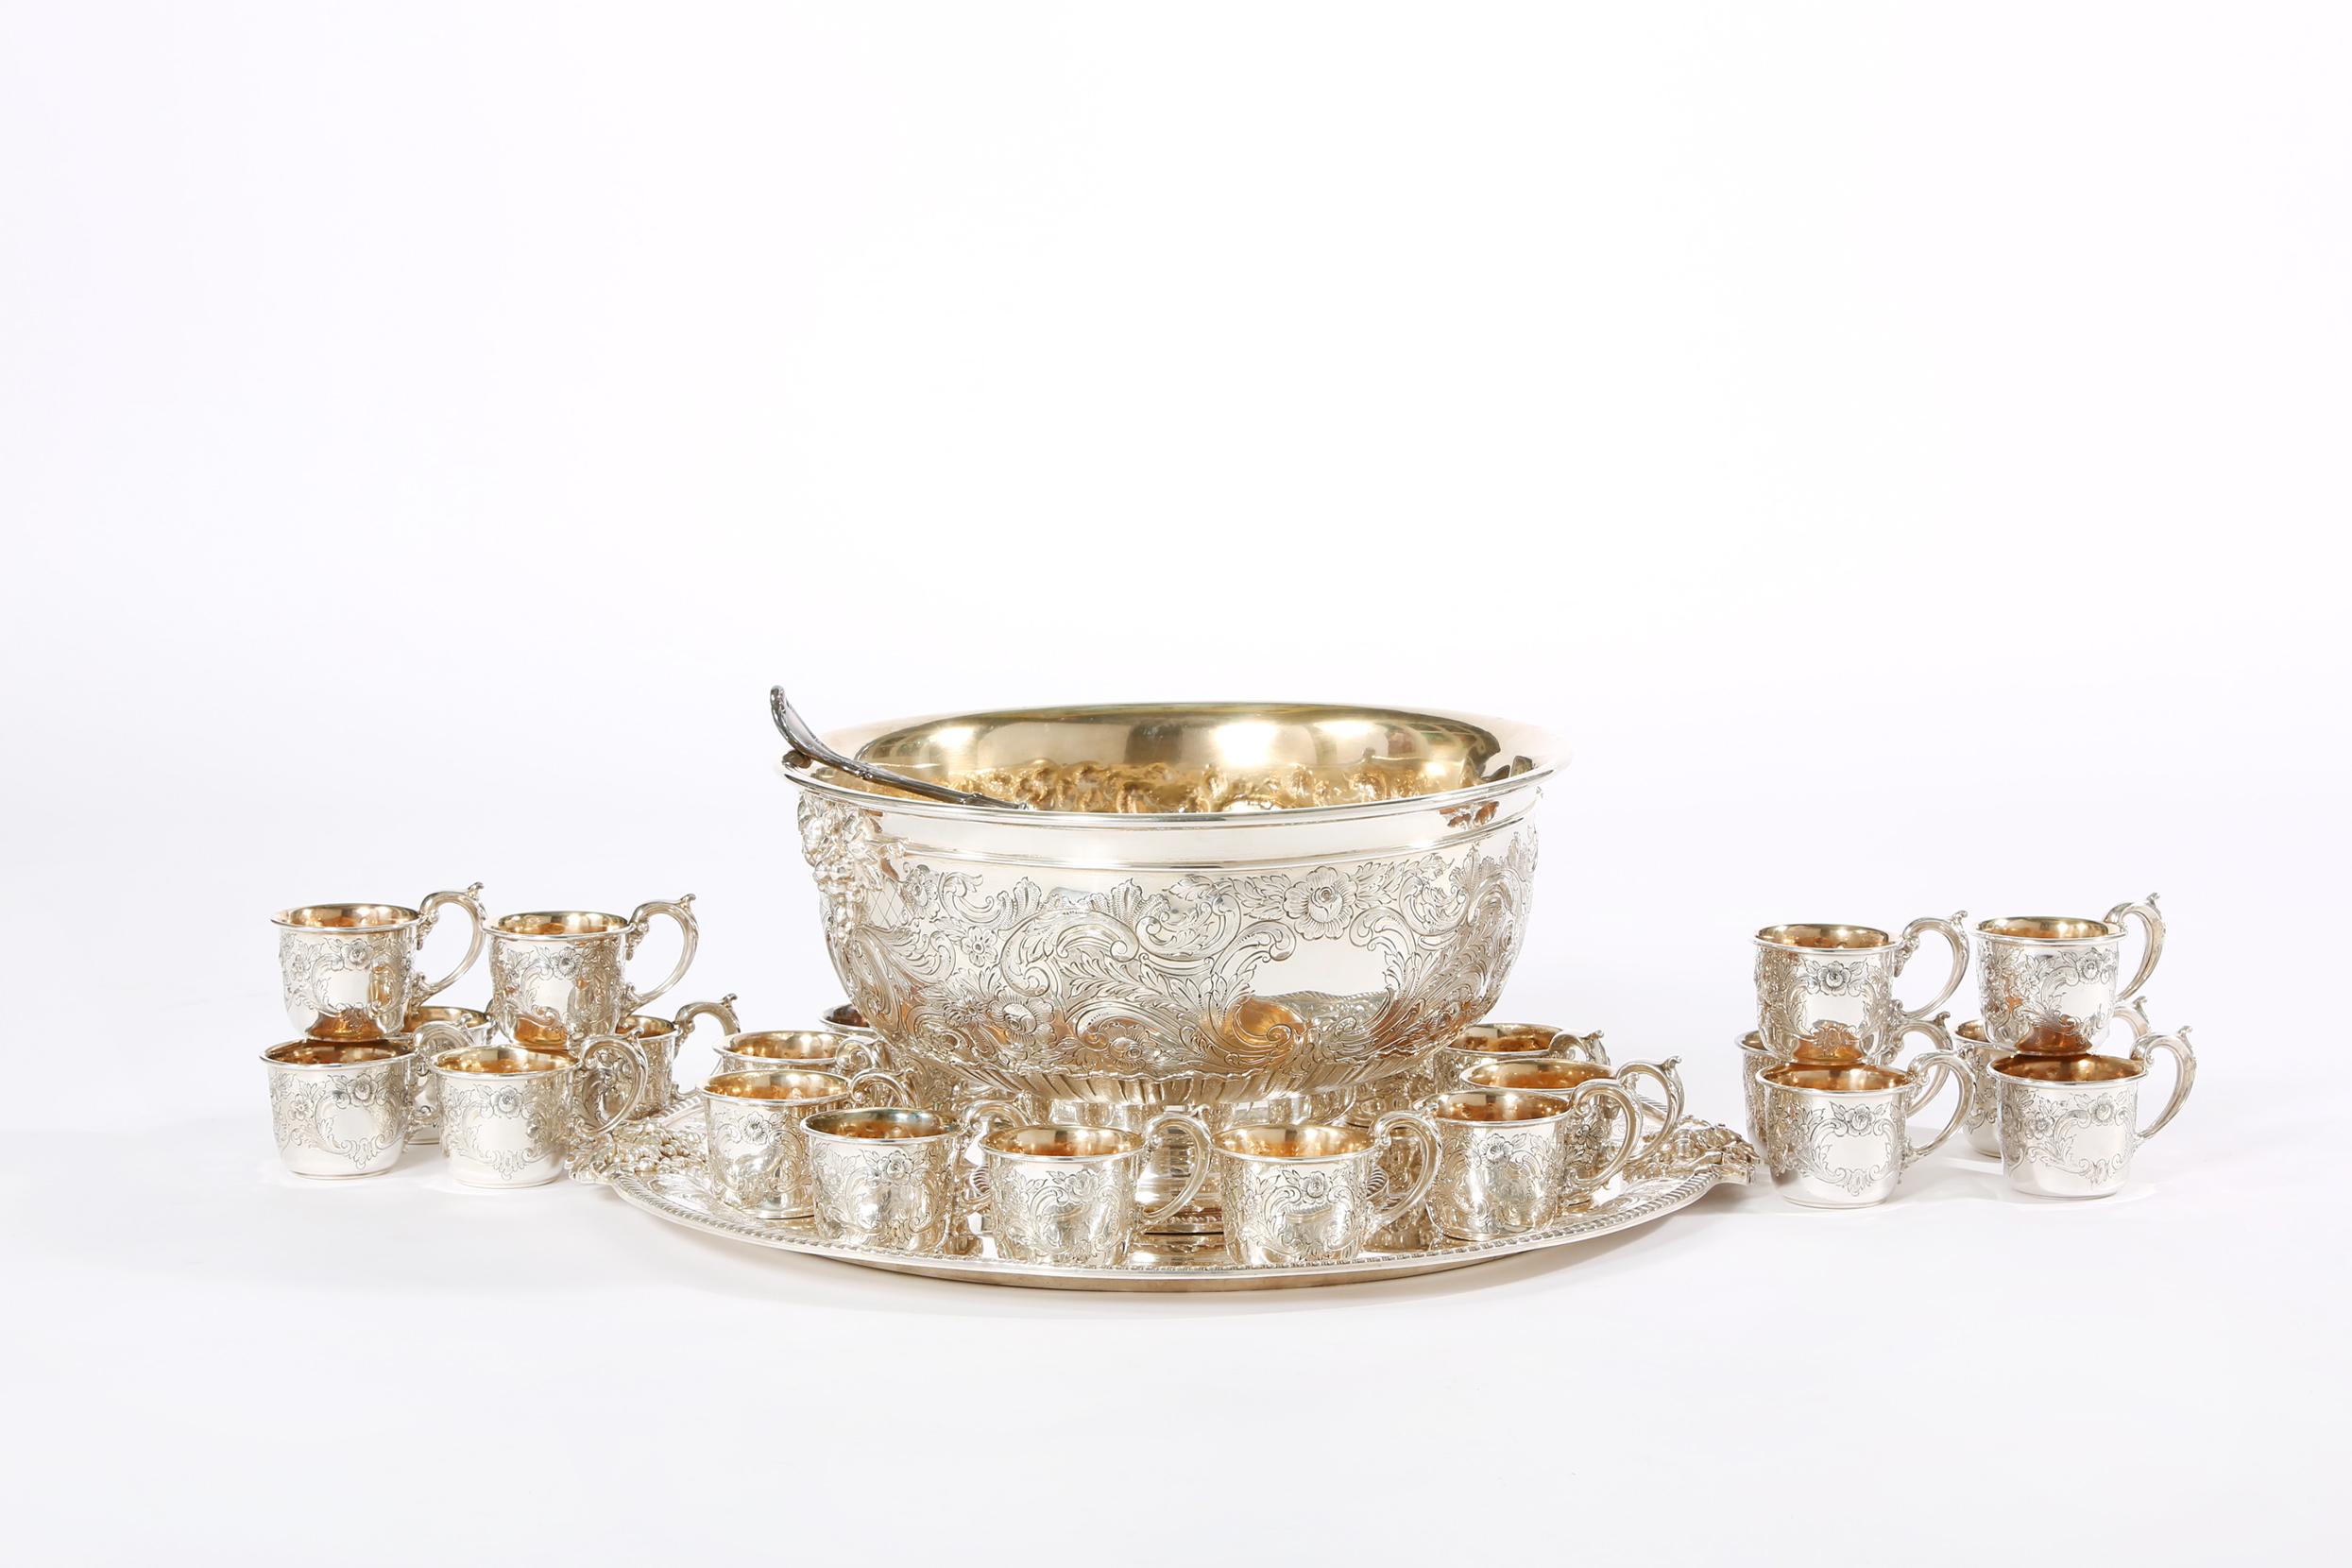 Very large and ornate design details North American regent style silver plated with gold wash interior punch bowl service for 24 people. Good condition. Minor wear consistent with age / use. Maker's mark undersigned. All together twenty seven piece.